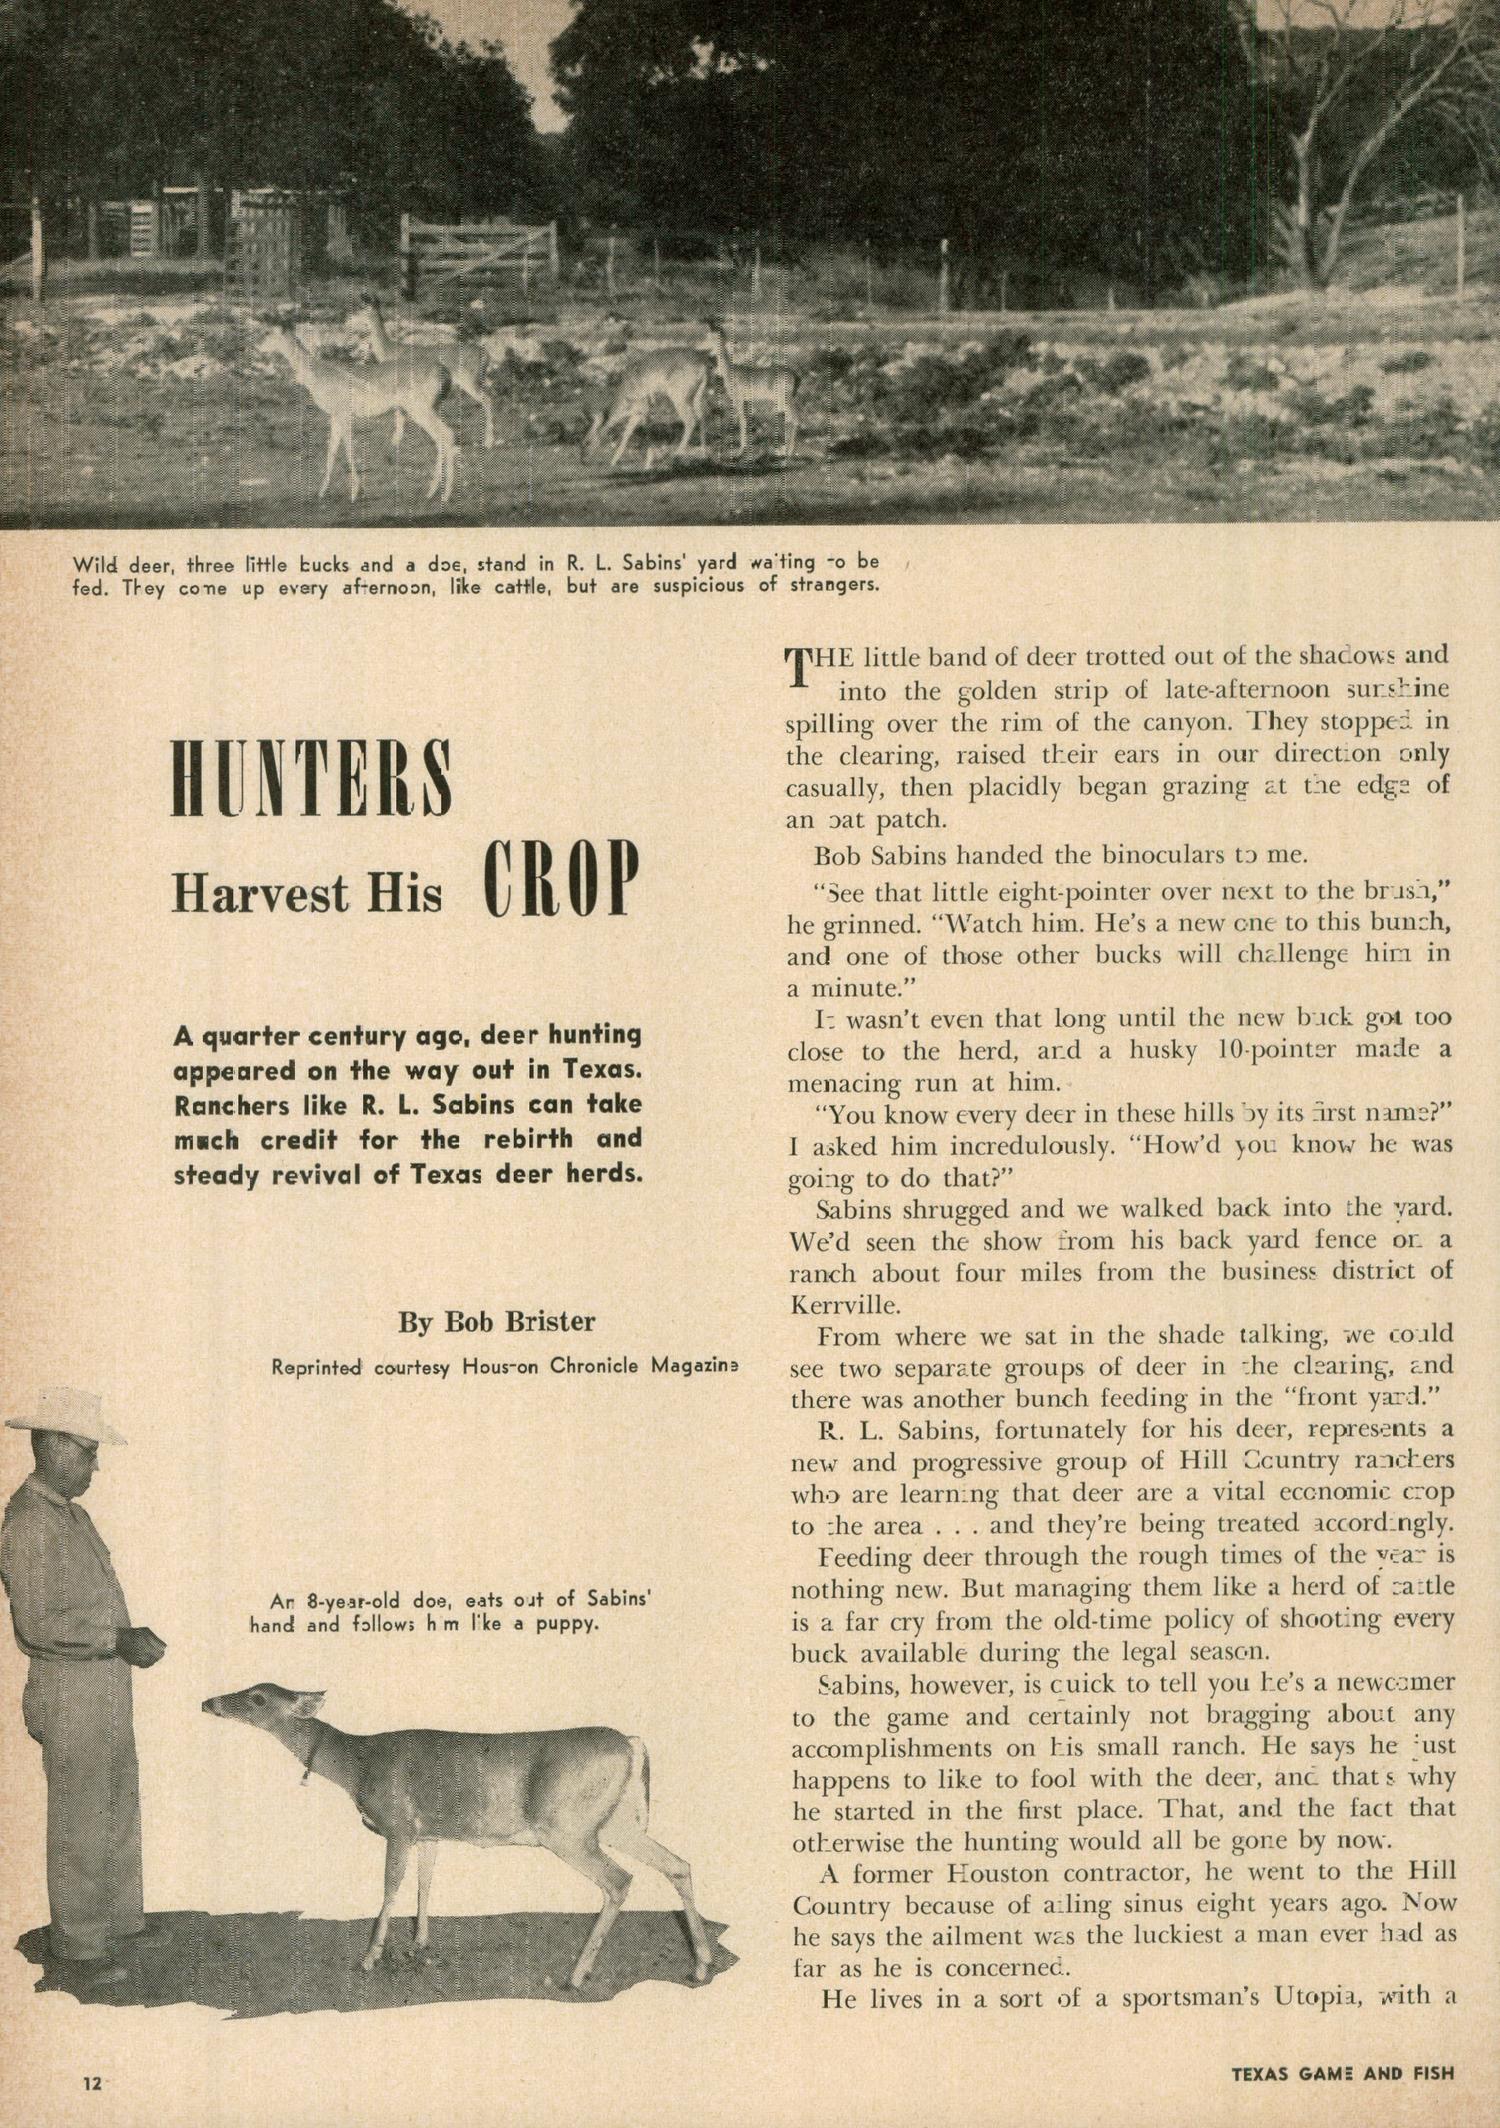 Texas Game and Fish, Volume 13, Number 4, April 1955
                                                
                                                    12
                                                